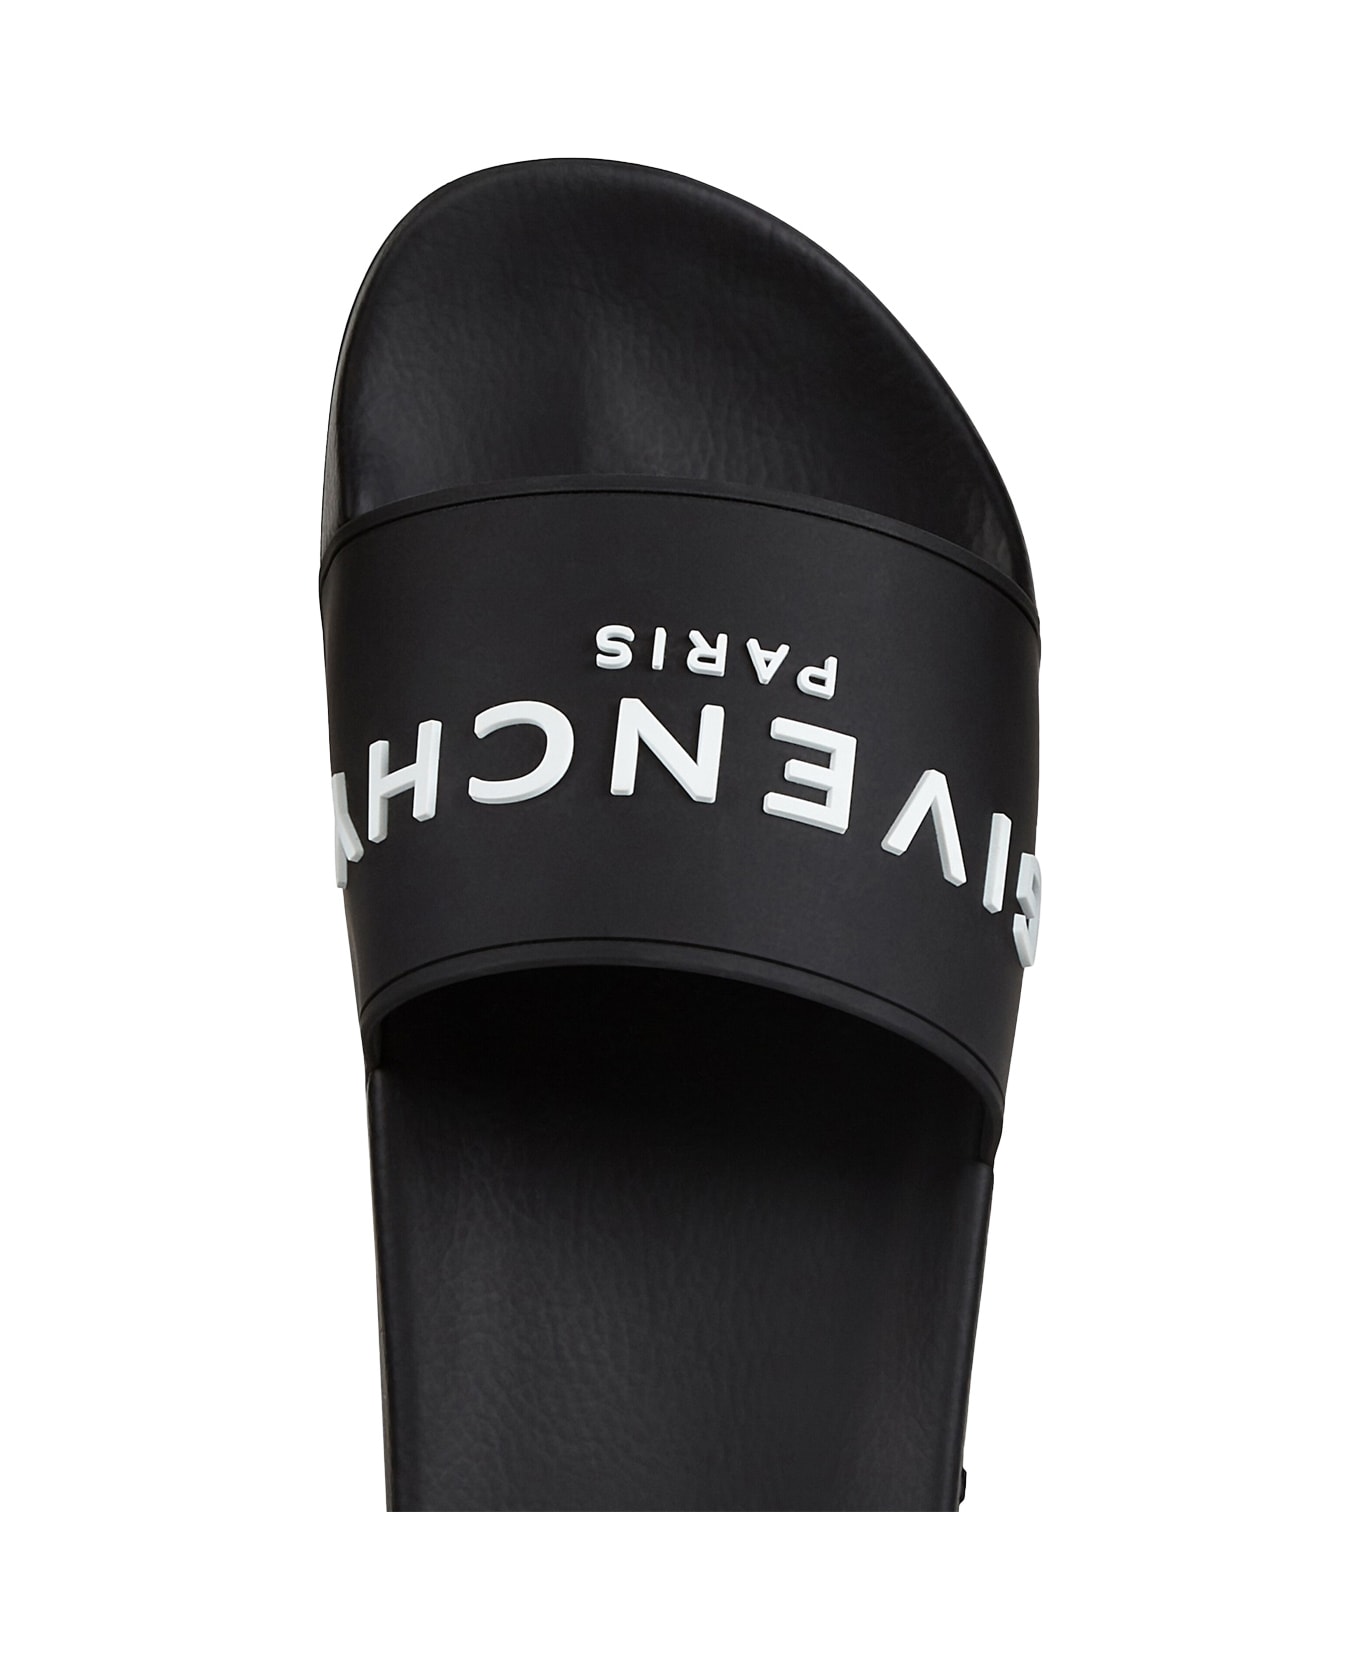 Givenchy Paris Slippers In Black Rubber - Black